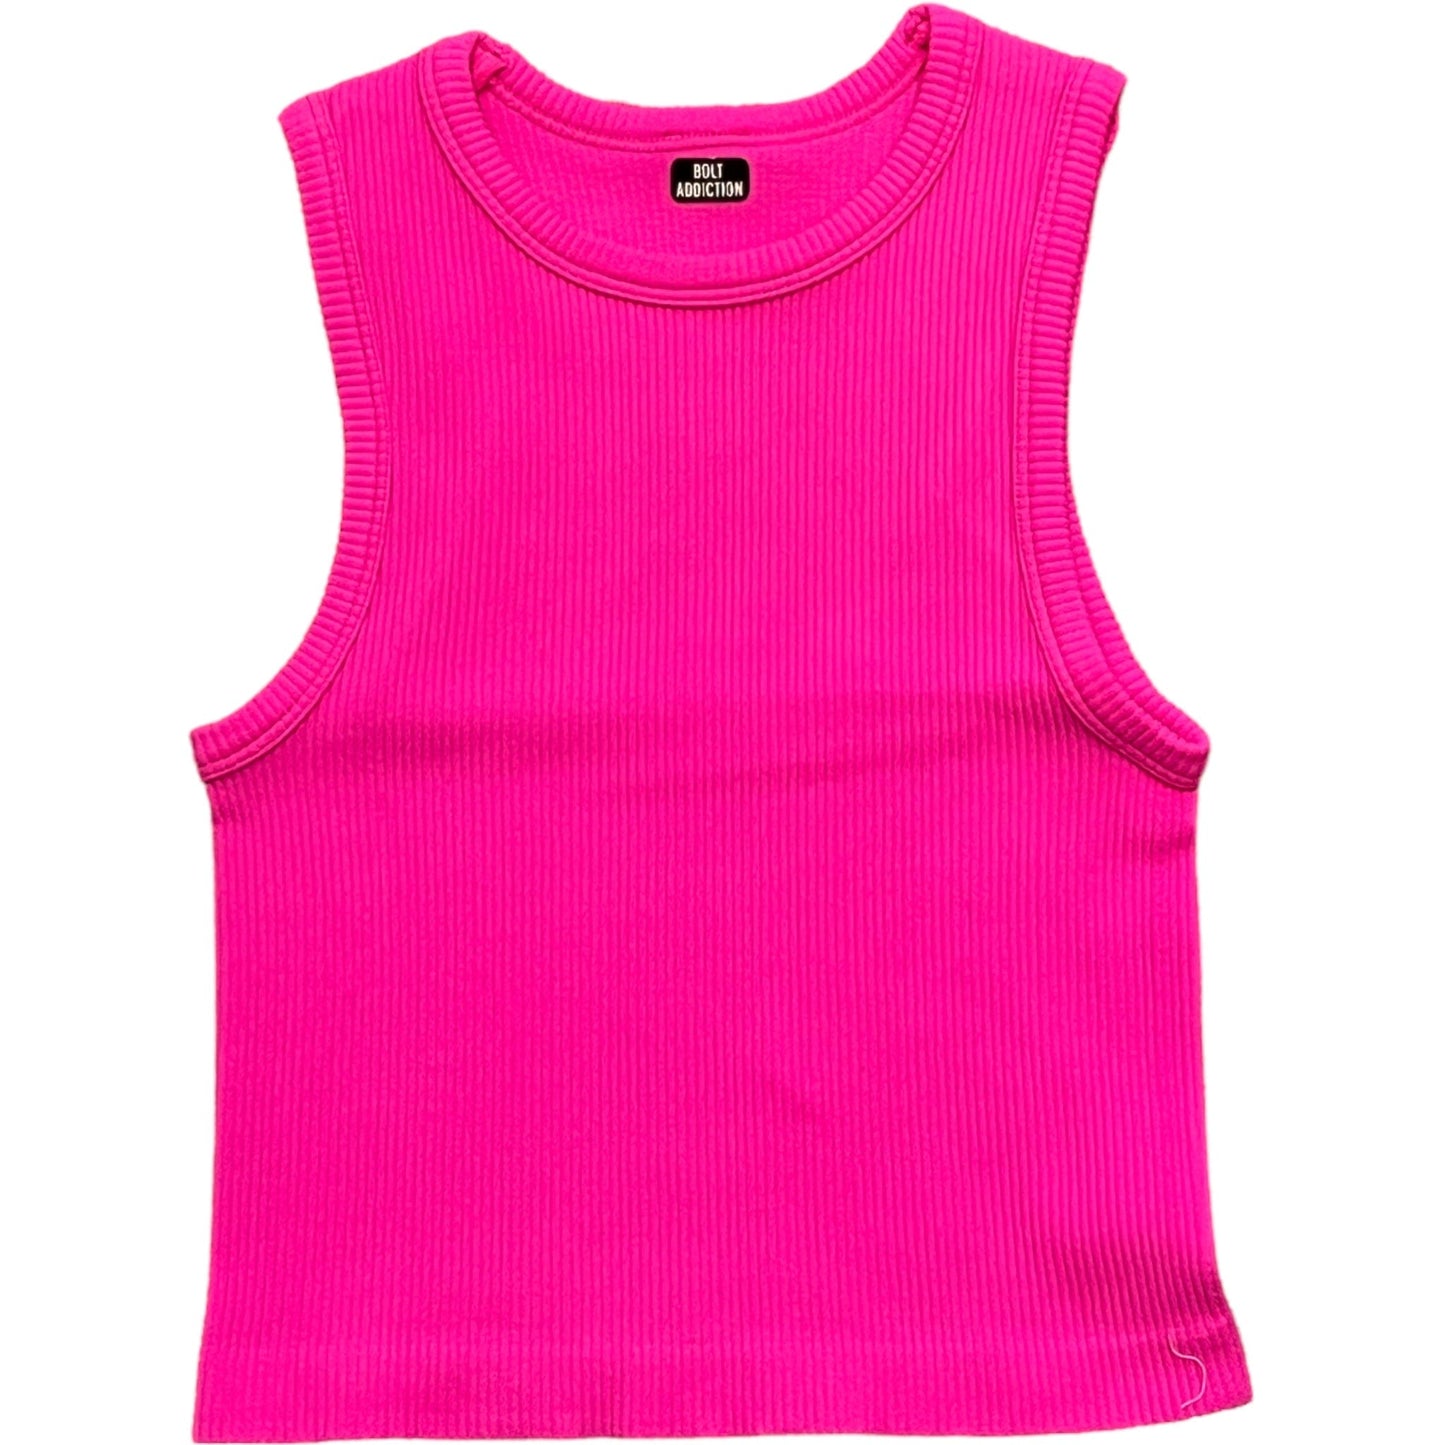 Cropped Tanks - Multiple colors and styles available